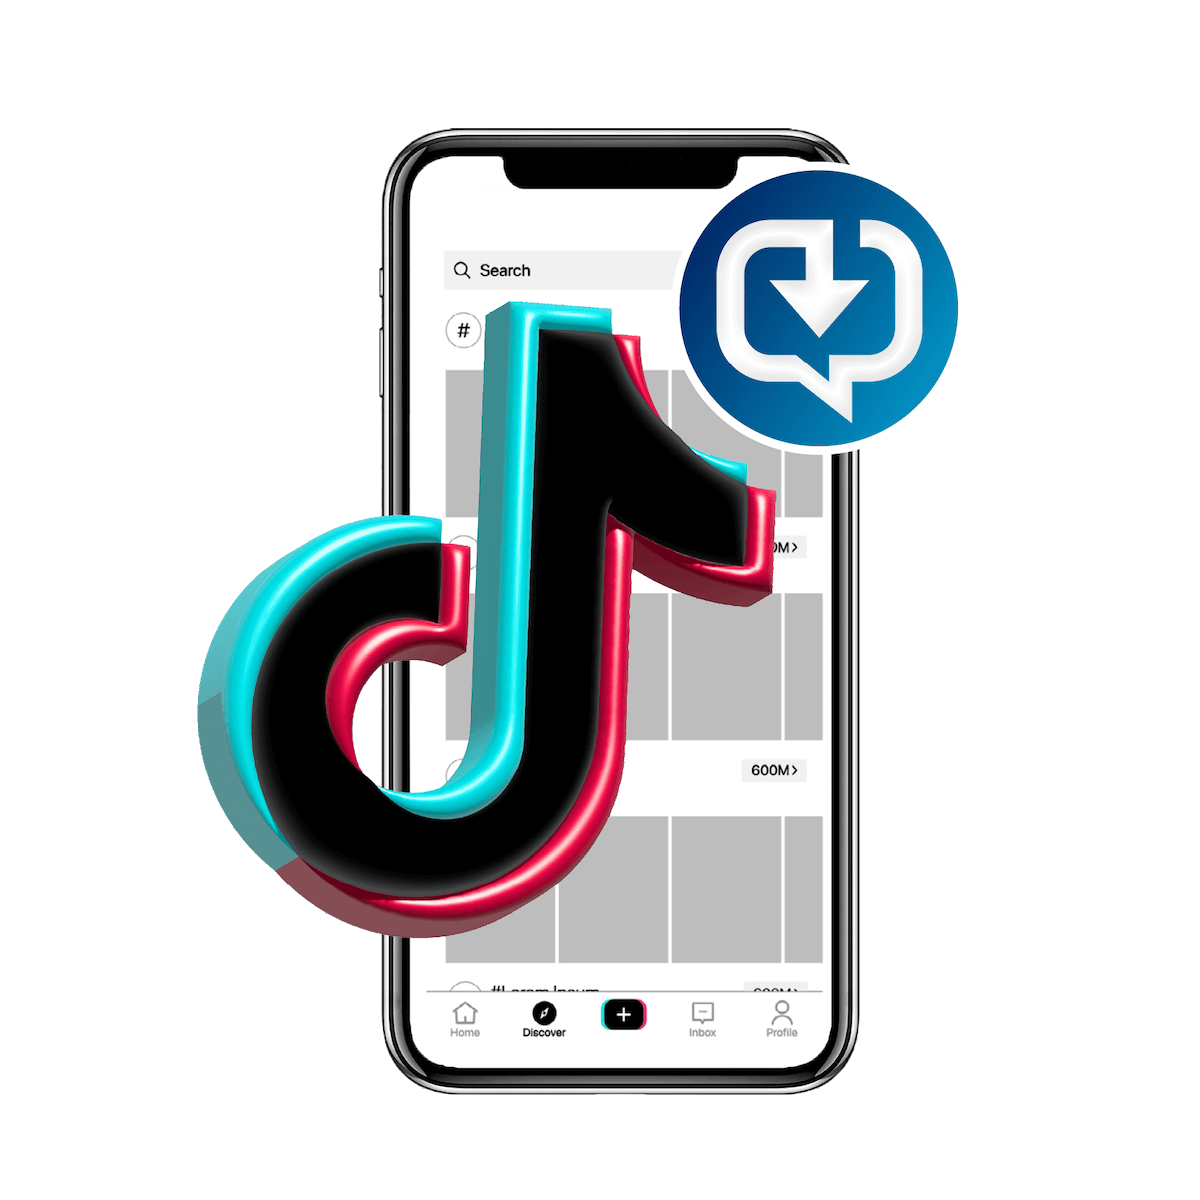 TikTok app being used on phone with ArchiveSocial logo beside